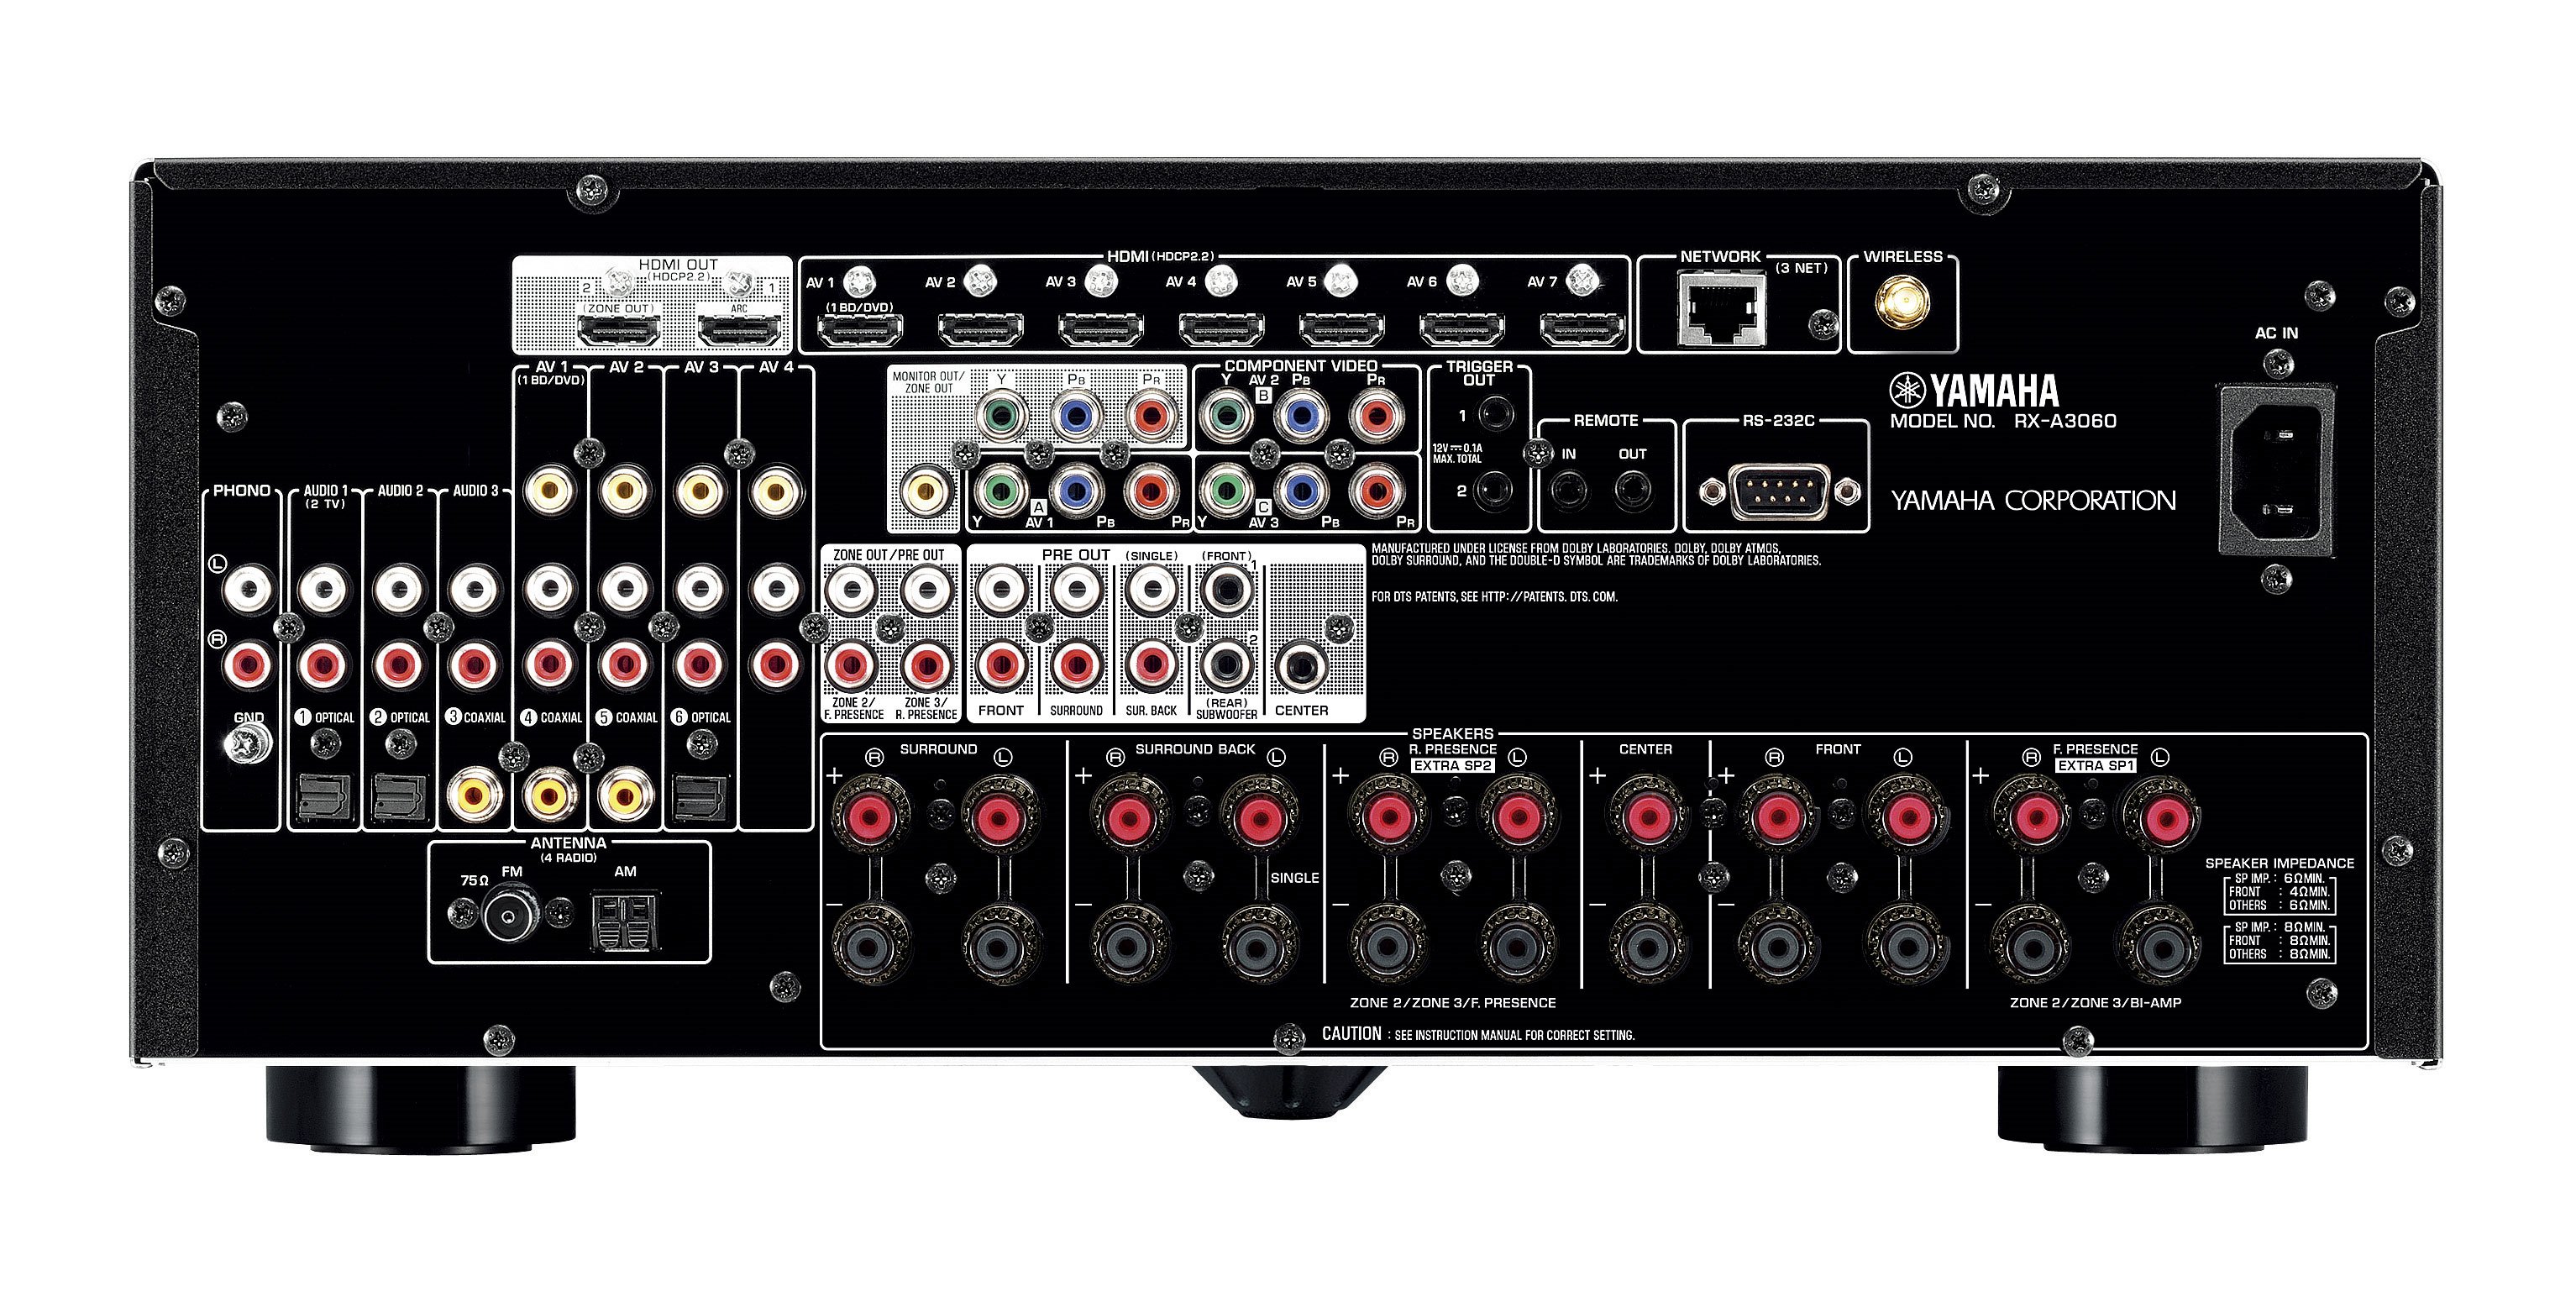 RX-A3060 - Overview - AV Receivers - Audio & Visual - Products 